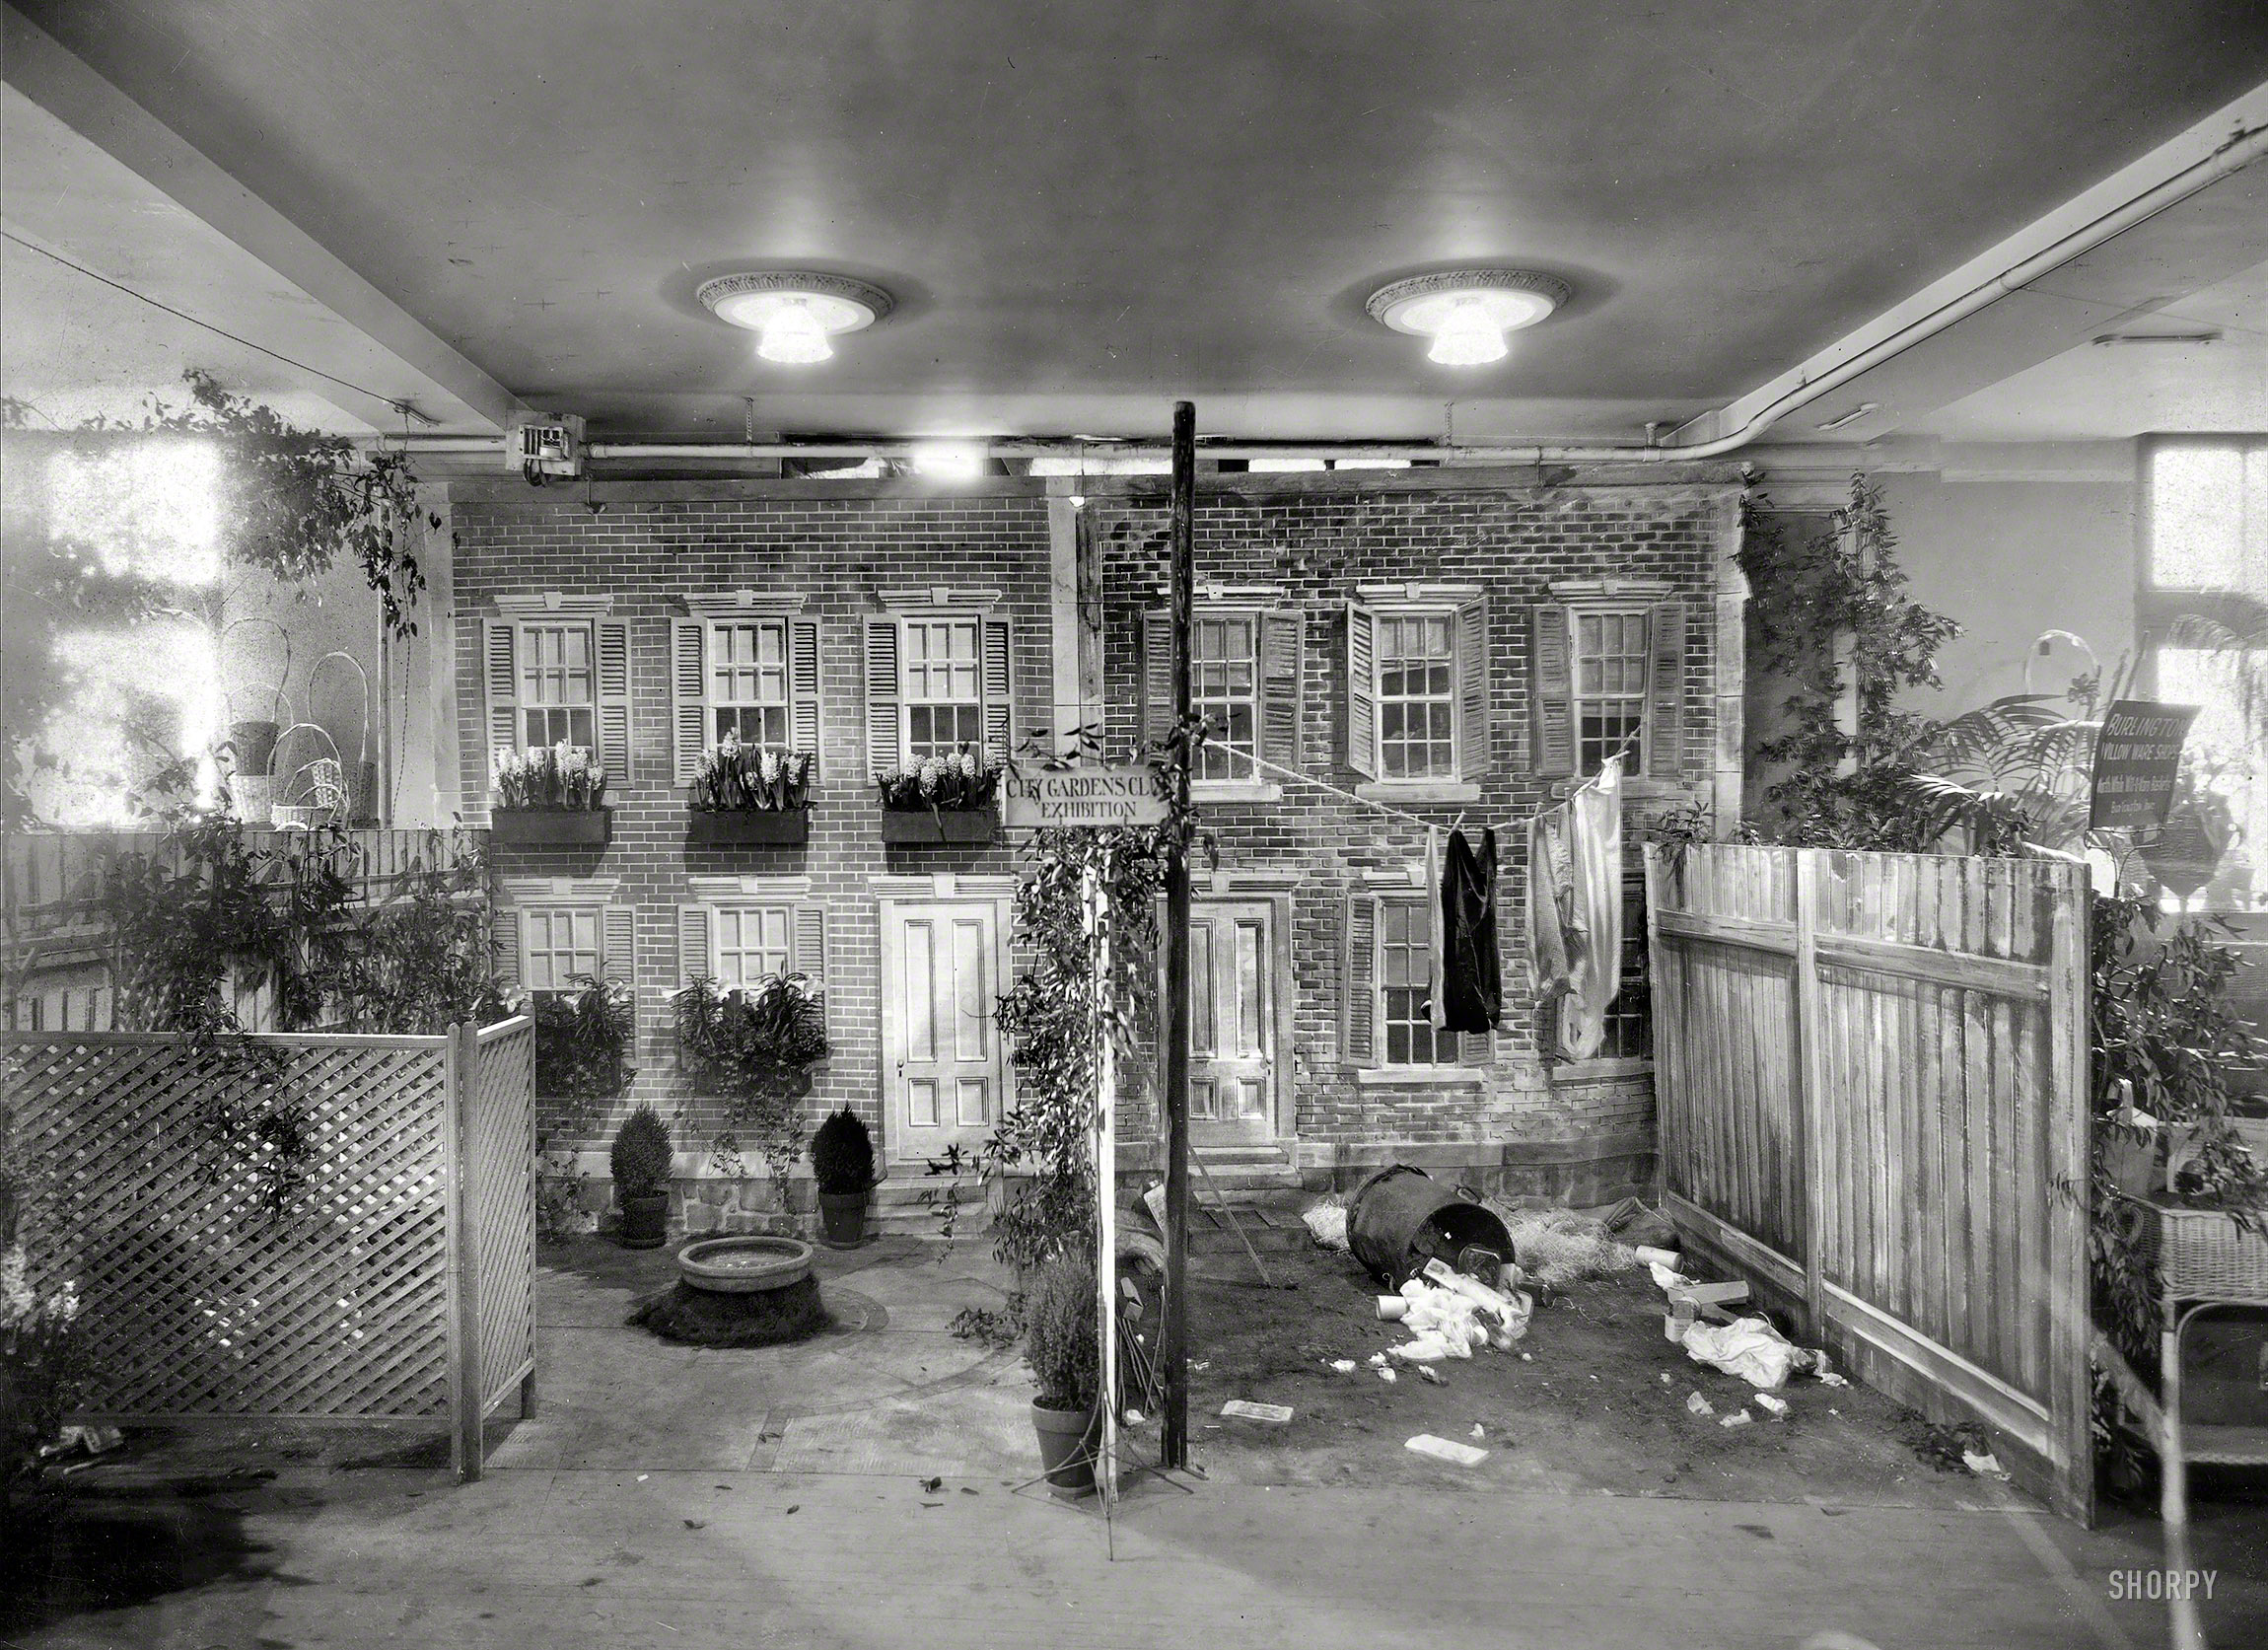 &nbsp; &nbsp; &nbsp; &nbsp; Before Urban Renewal, there was the Hyacinth Window Box.
March 1921. "City Gardens Club of New York exhibit at the International Flower Show, Grand Central Palace." From the Home Improvement issue of Better Hovels & Gardens. Gelatin silver print by Frances Benjamin Johnston. View full size.